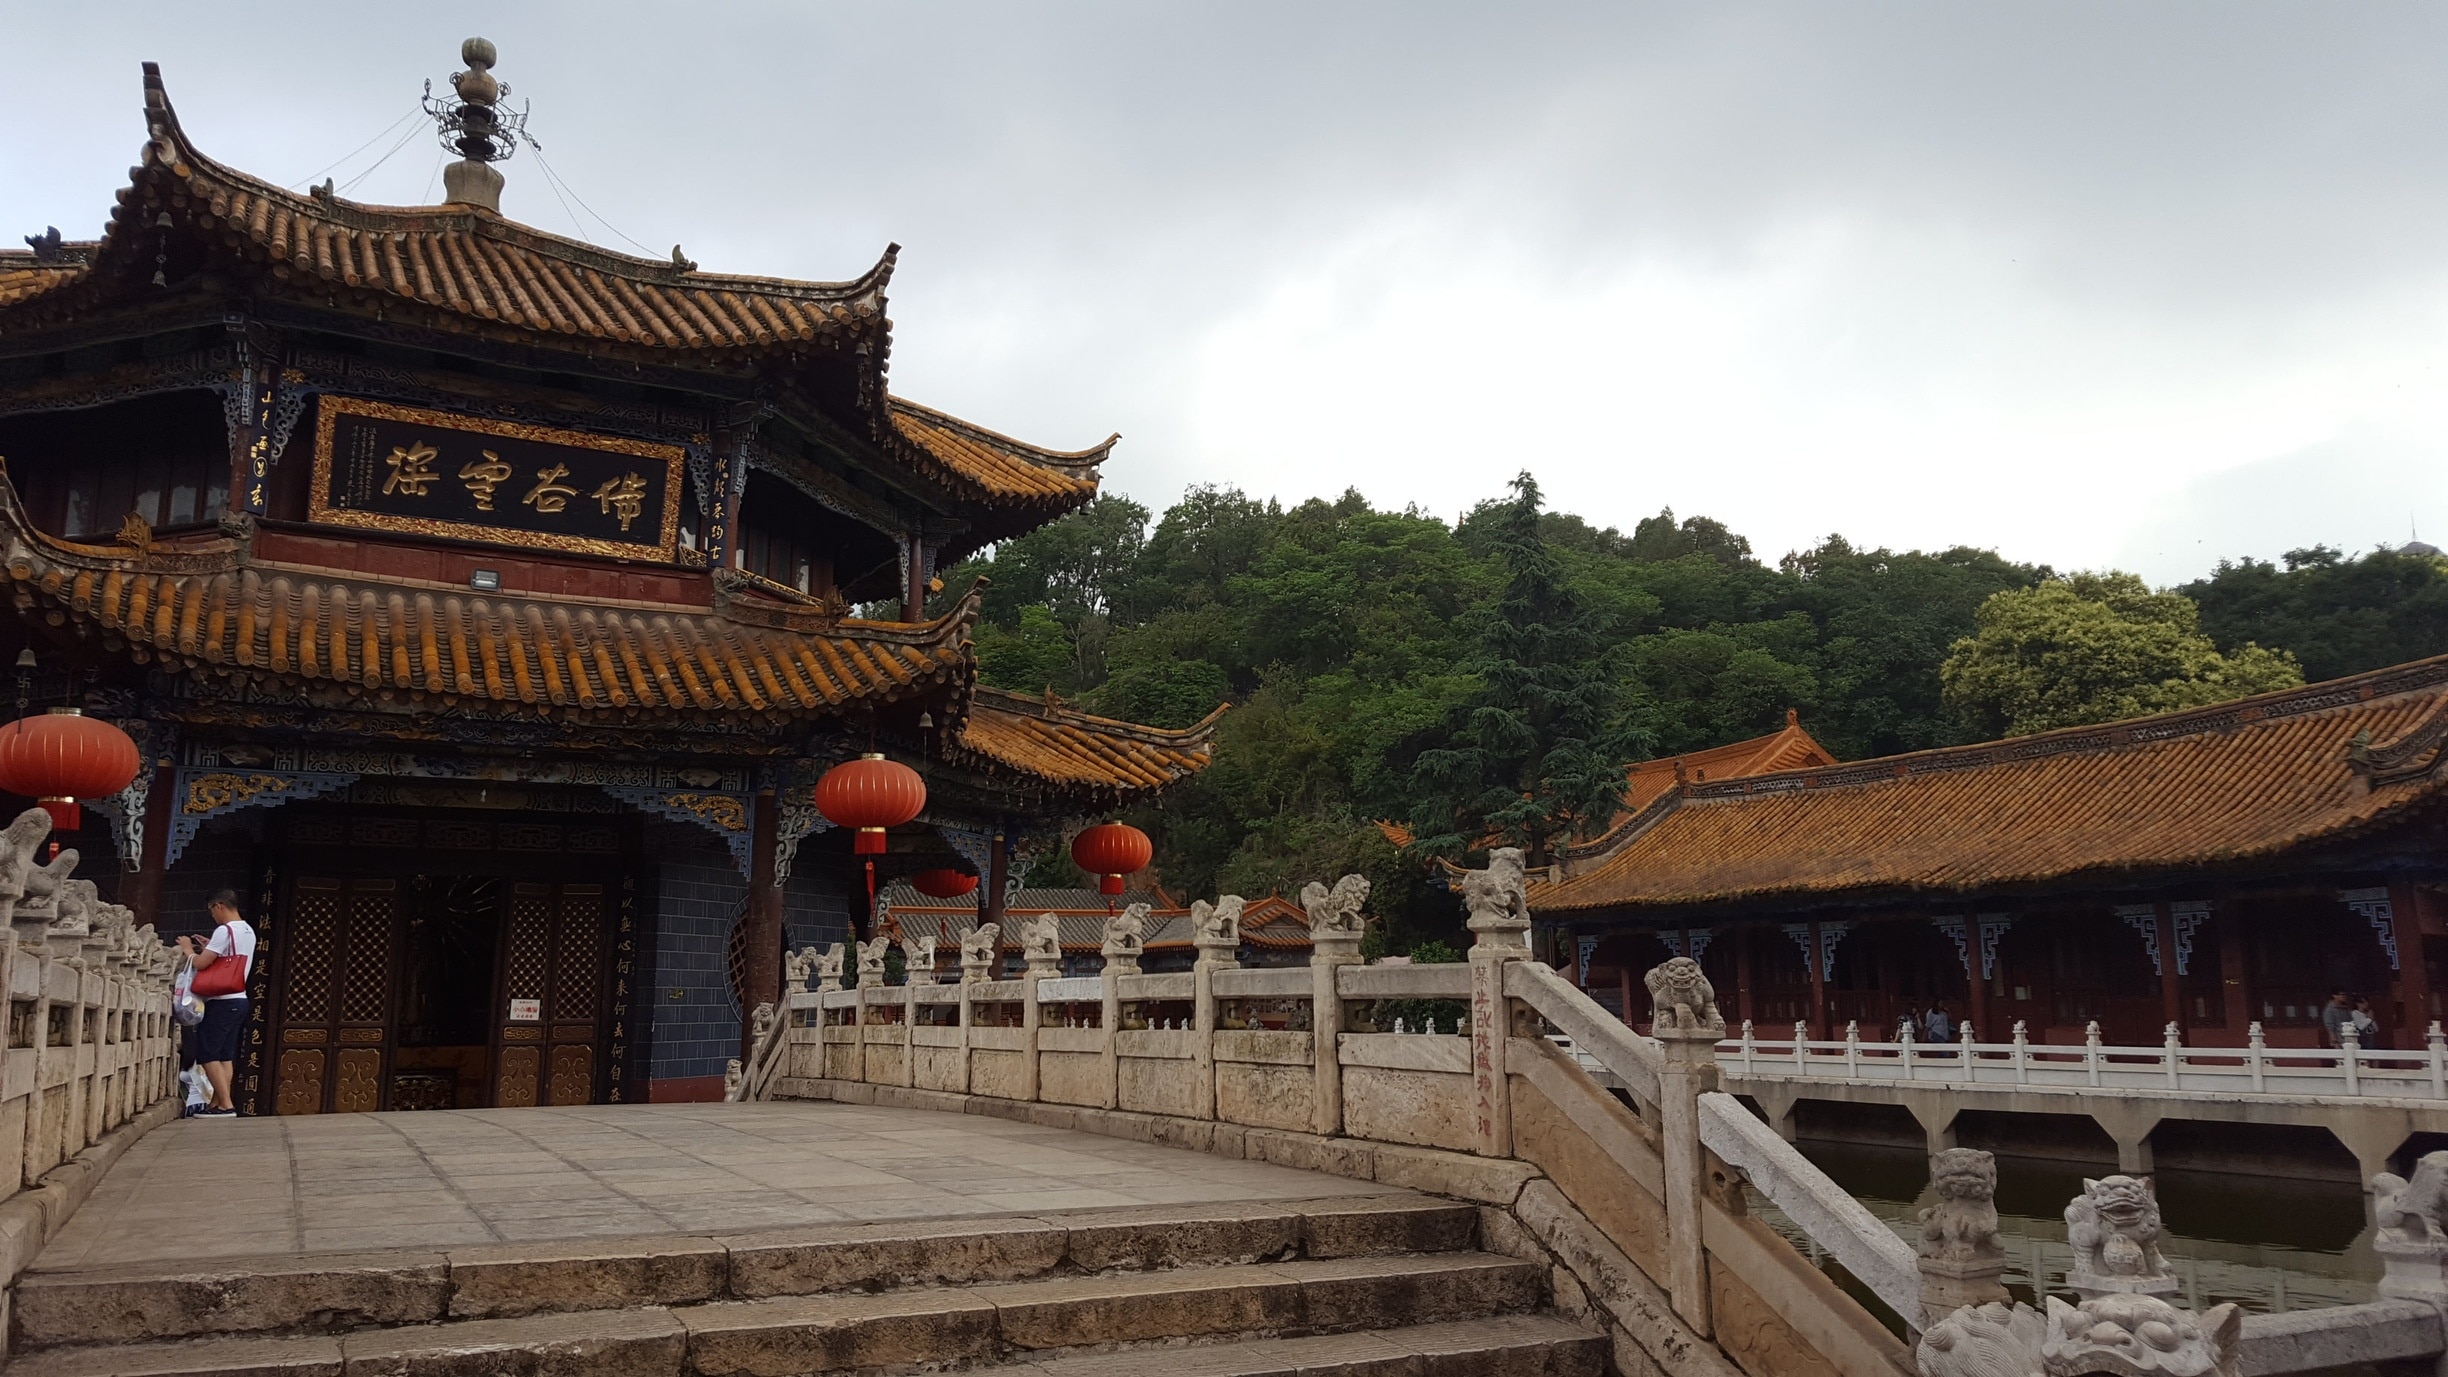 Yuantong Temple is a 1200 year old Buddhist temple in the heart of Kunming. ¥6 to enter but totally worth it.